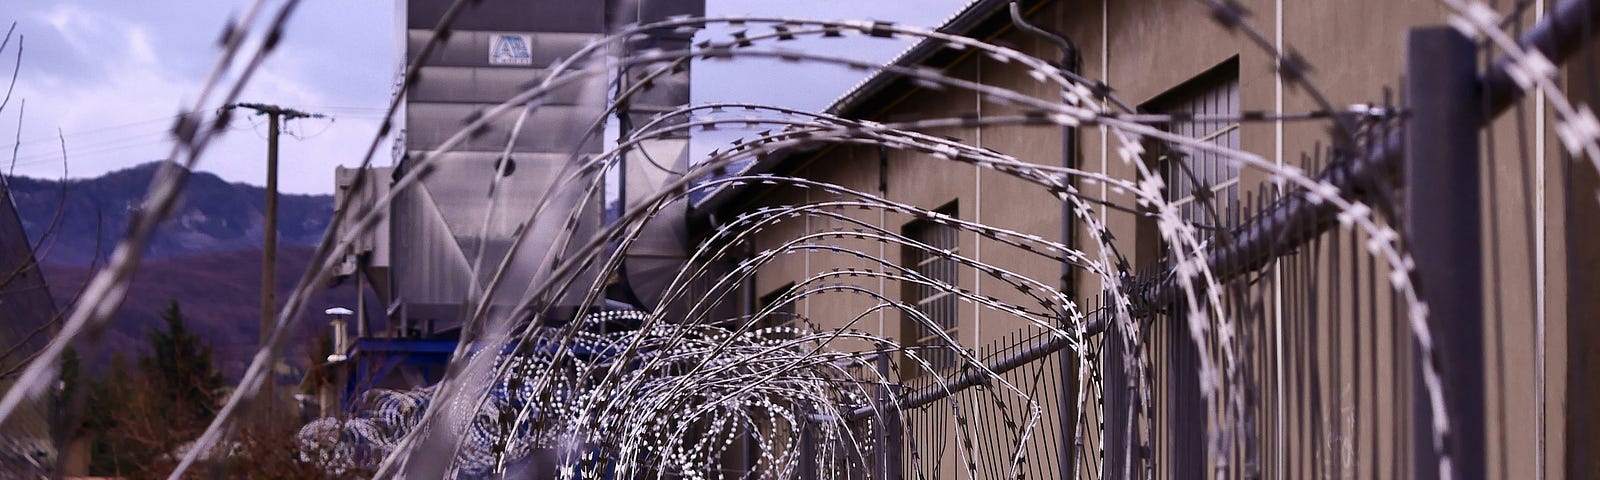 Barbed wire in a spiral/tunnel shape outside a prison’s walls